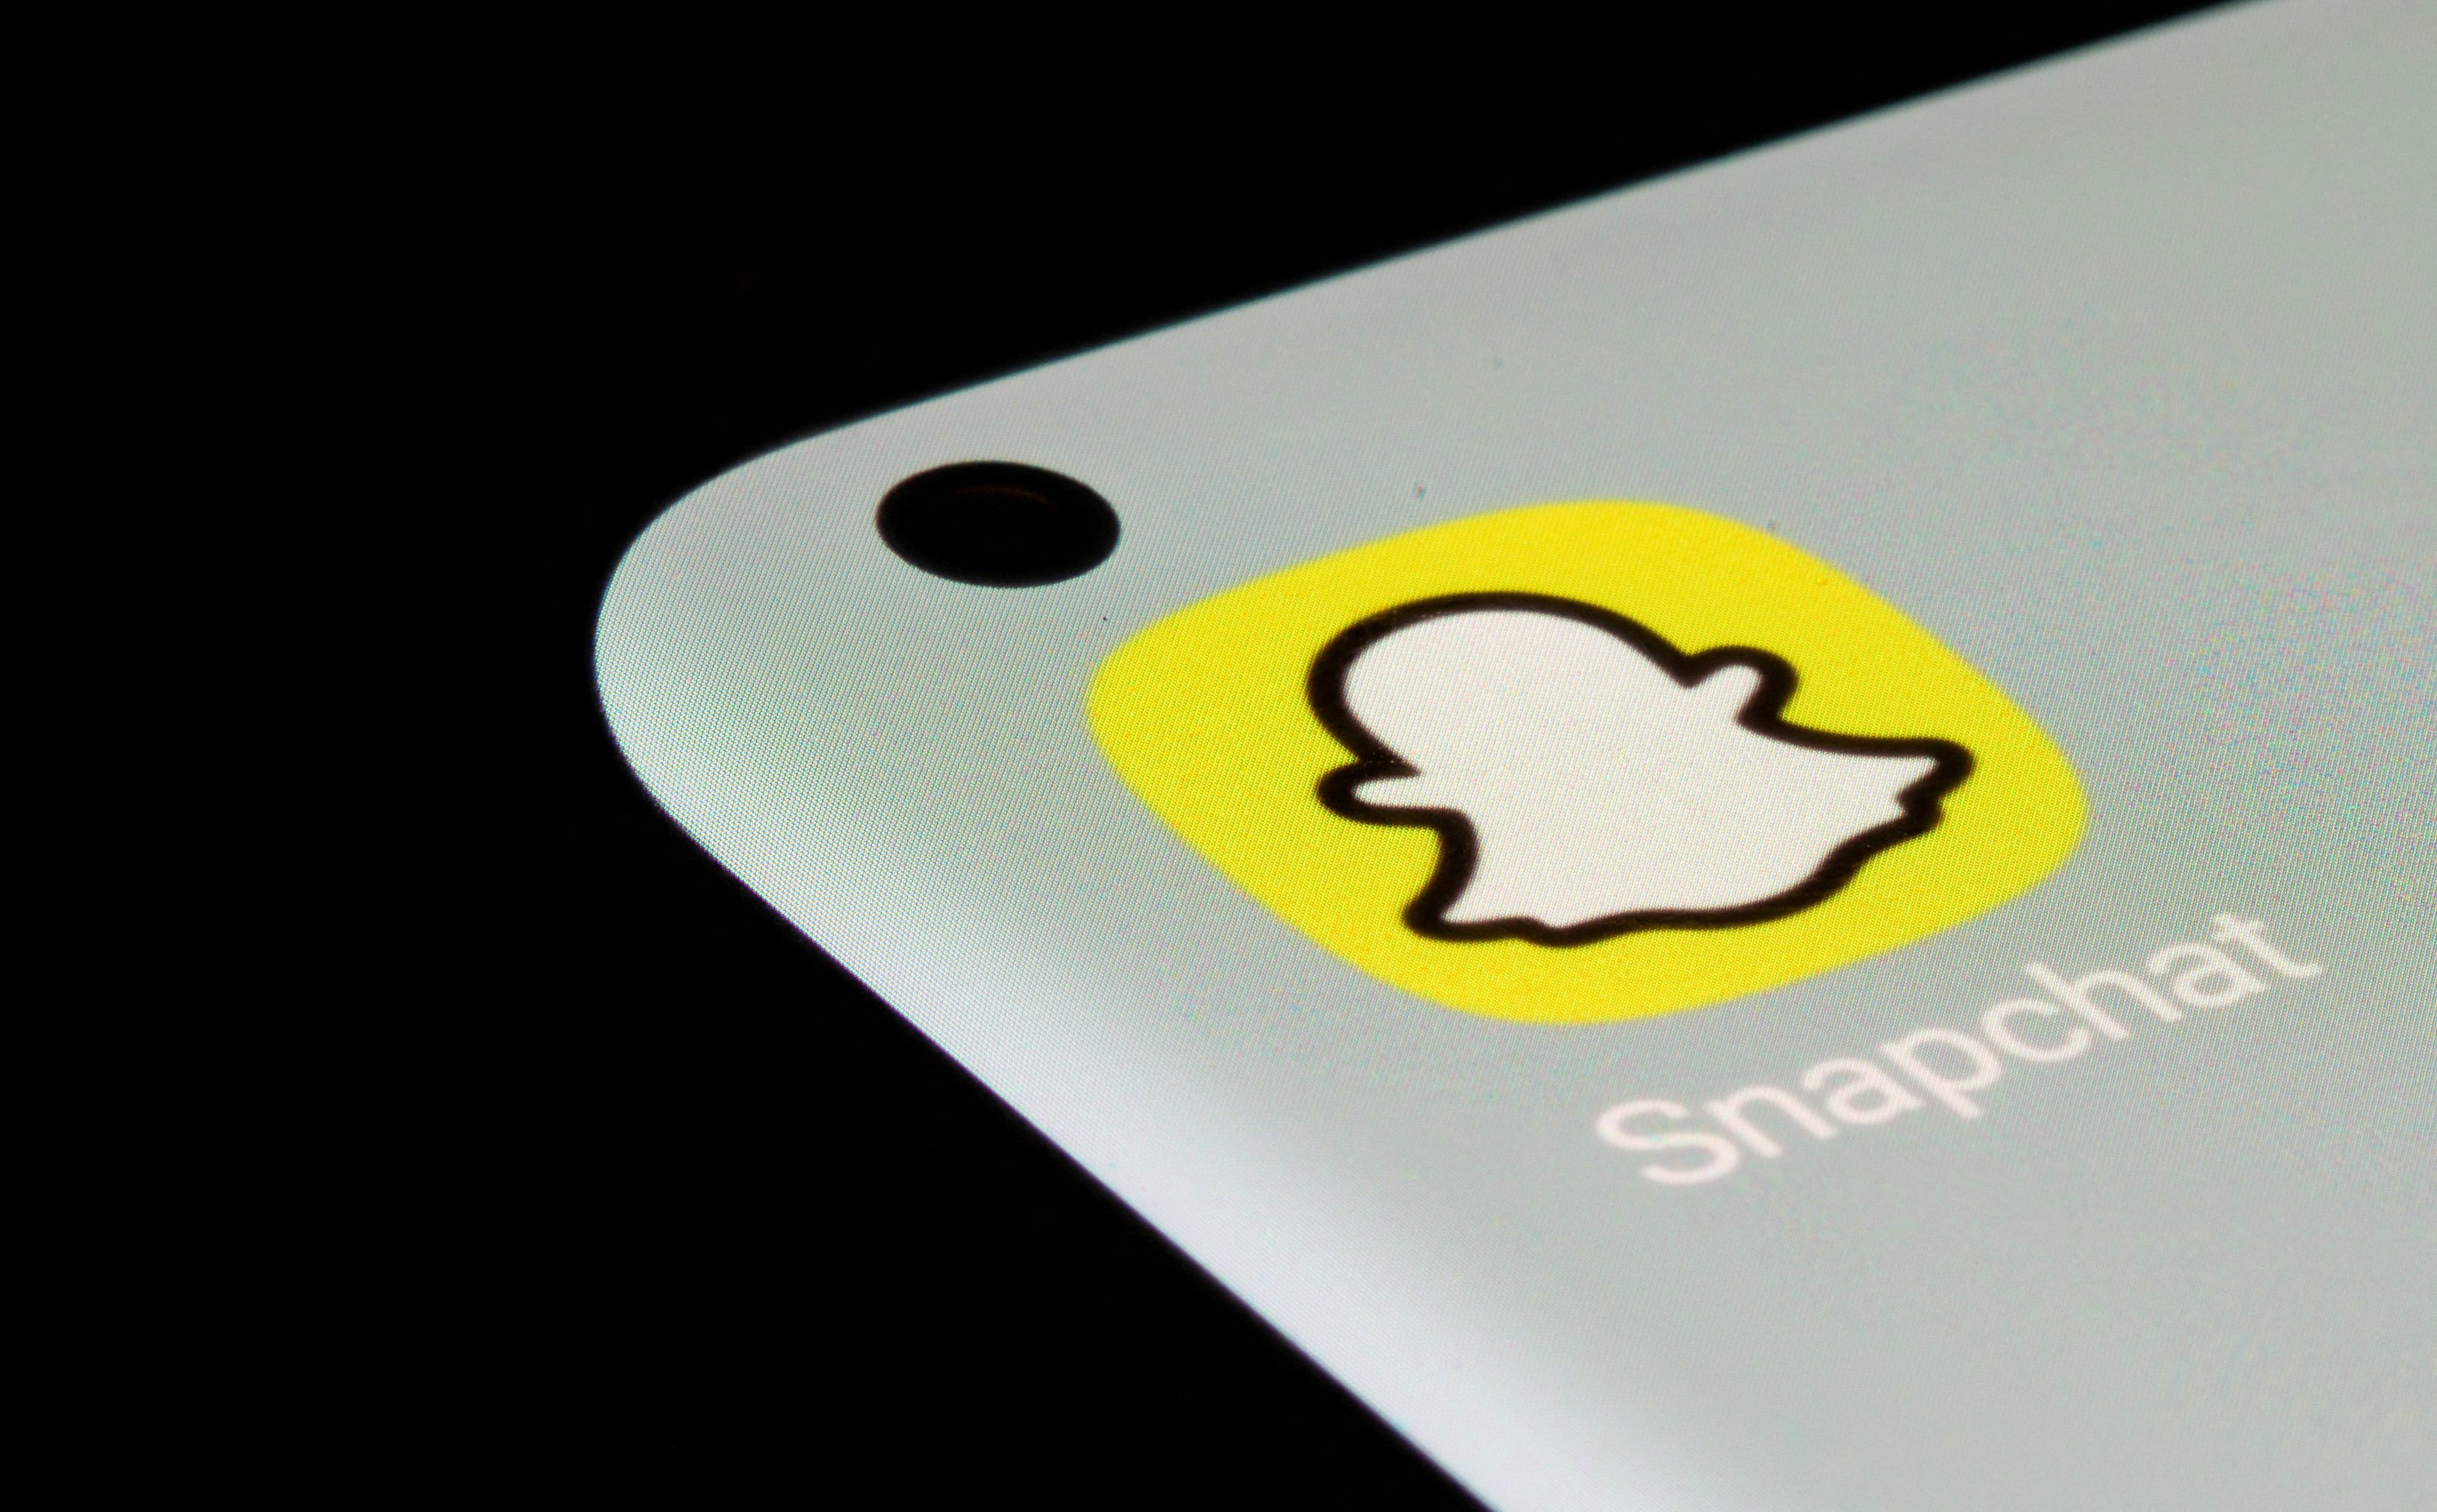 The unidentified offender in Norway molested a minor and used the Snapchat messaging app to connect with young boys. Photo: Reuters